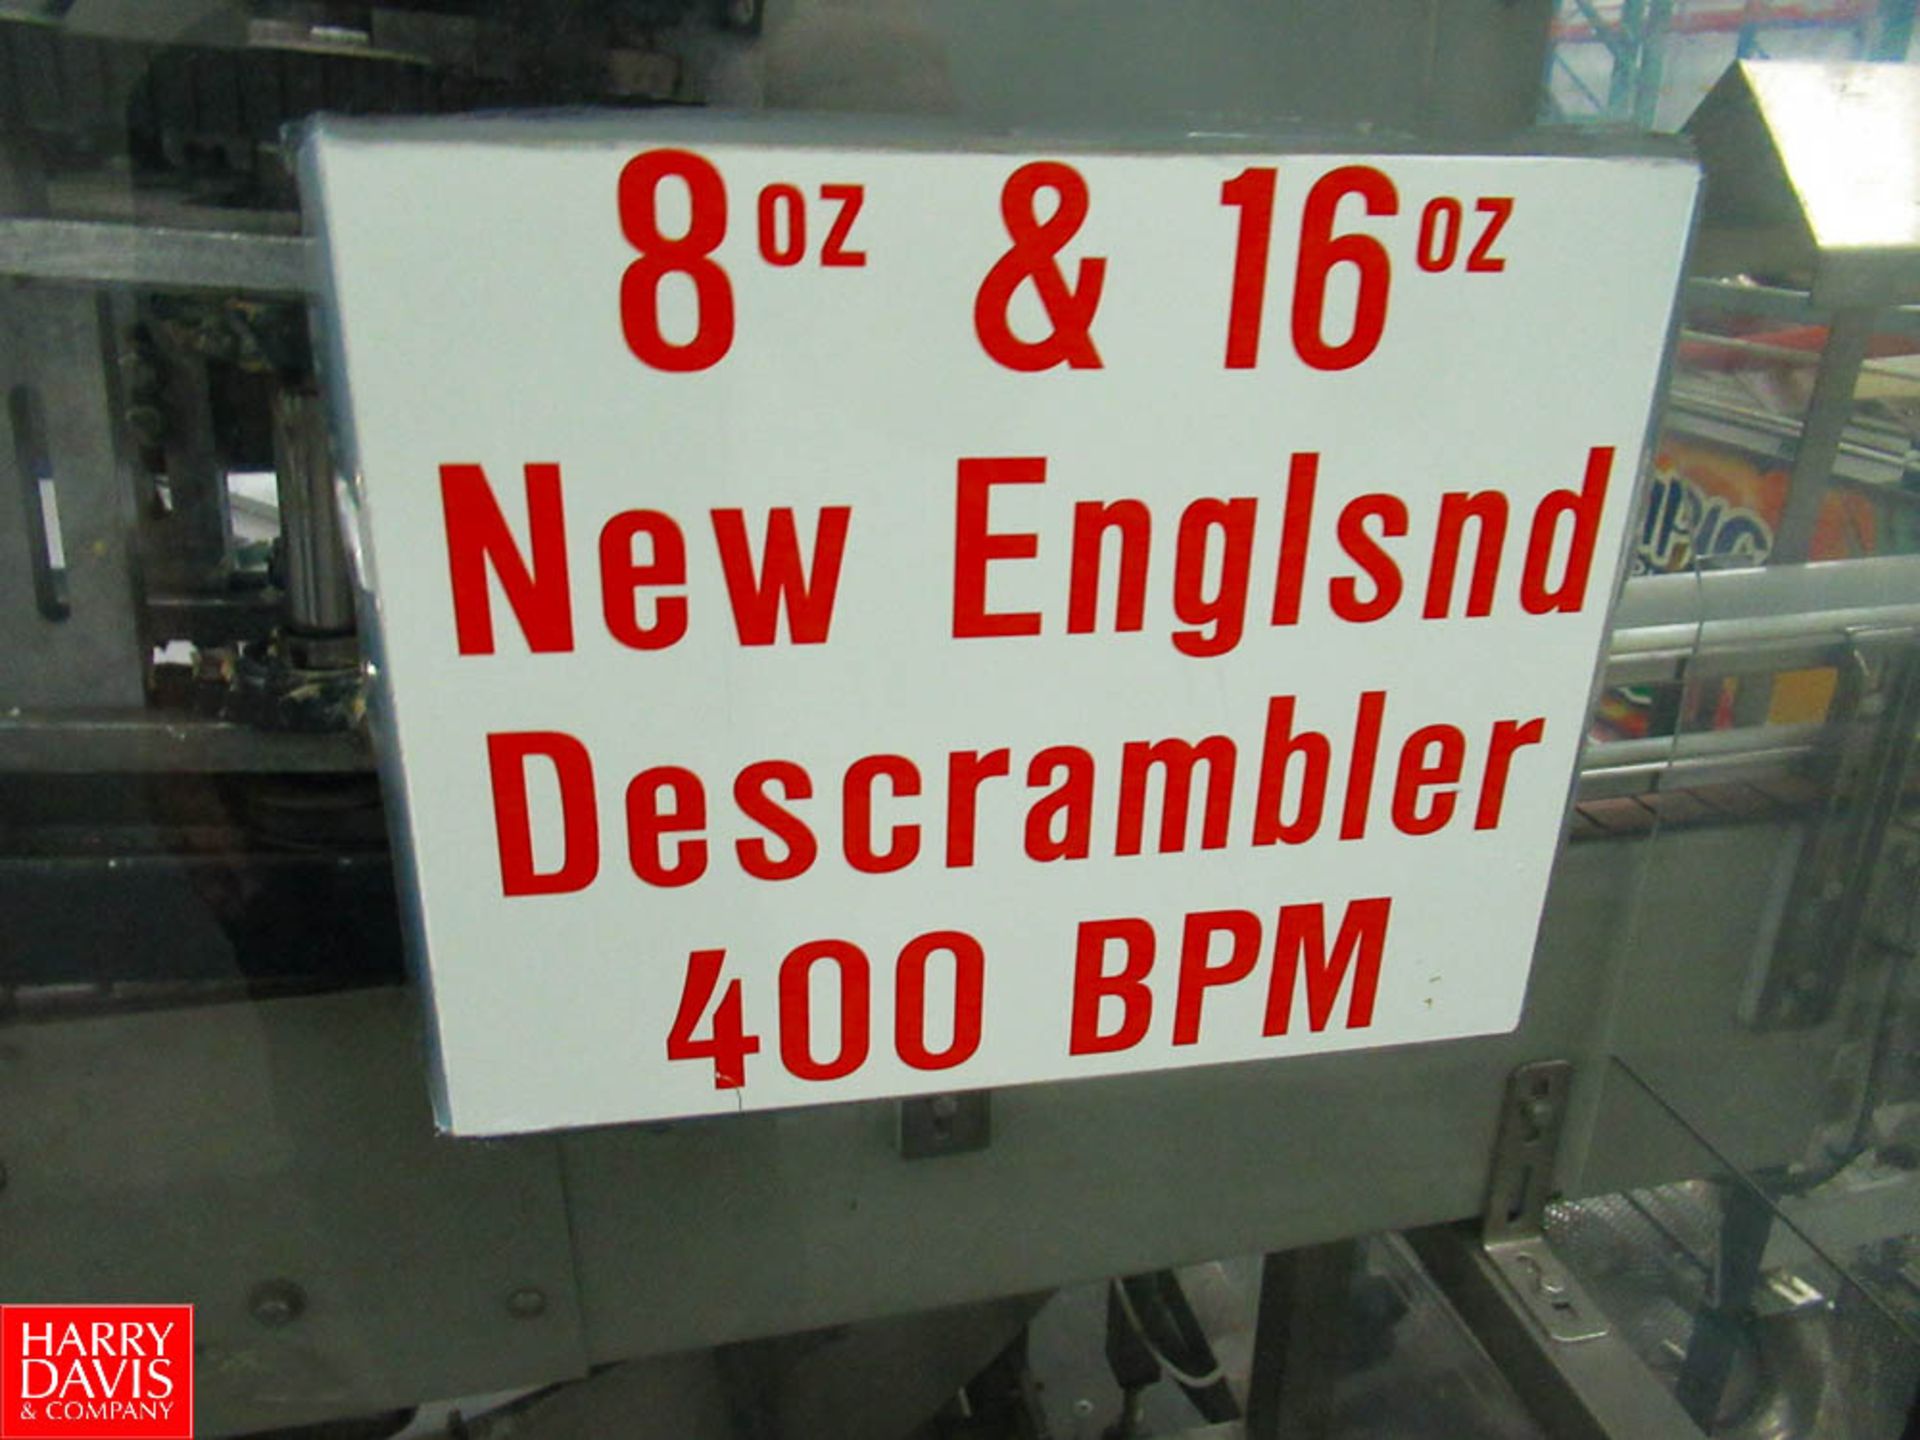 New England Linear Bottle Unscrambler, Model: H/E-100, SN: 1-8514, Utilized With Filling Line 8 - Image 6 of 6